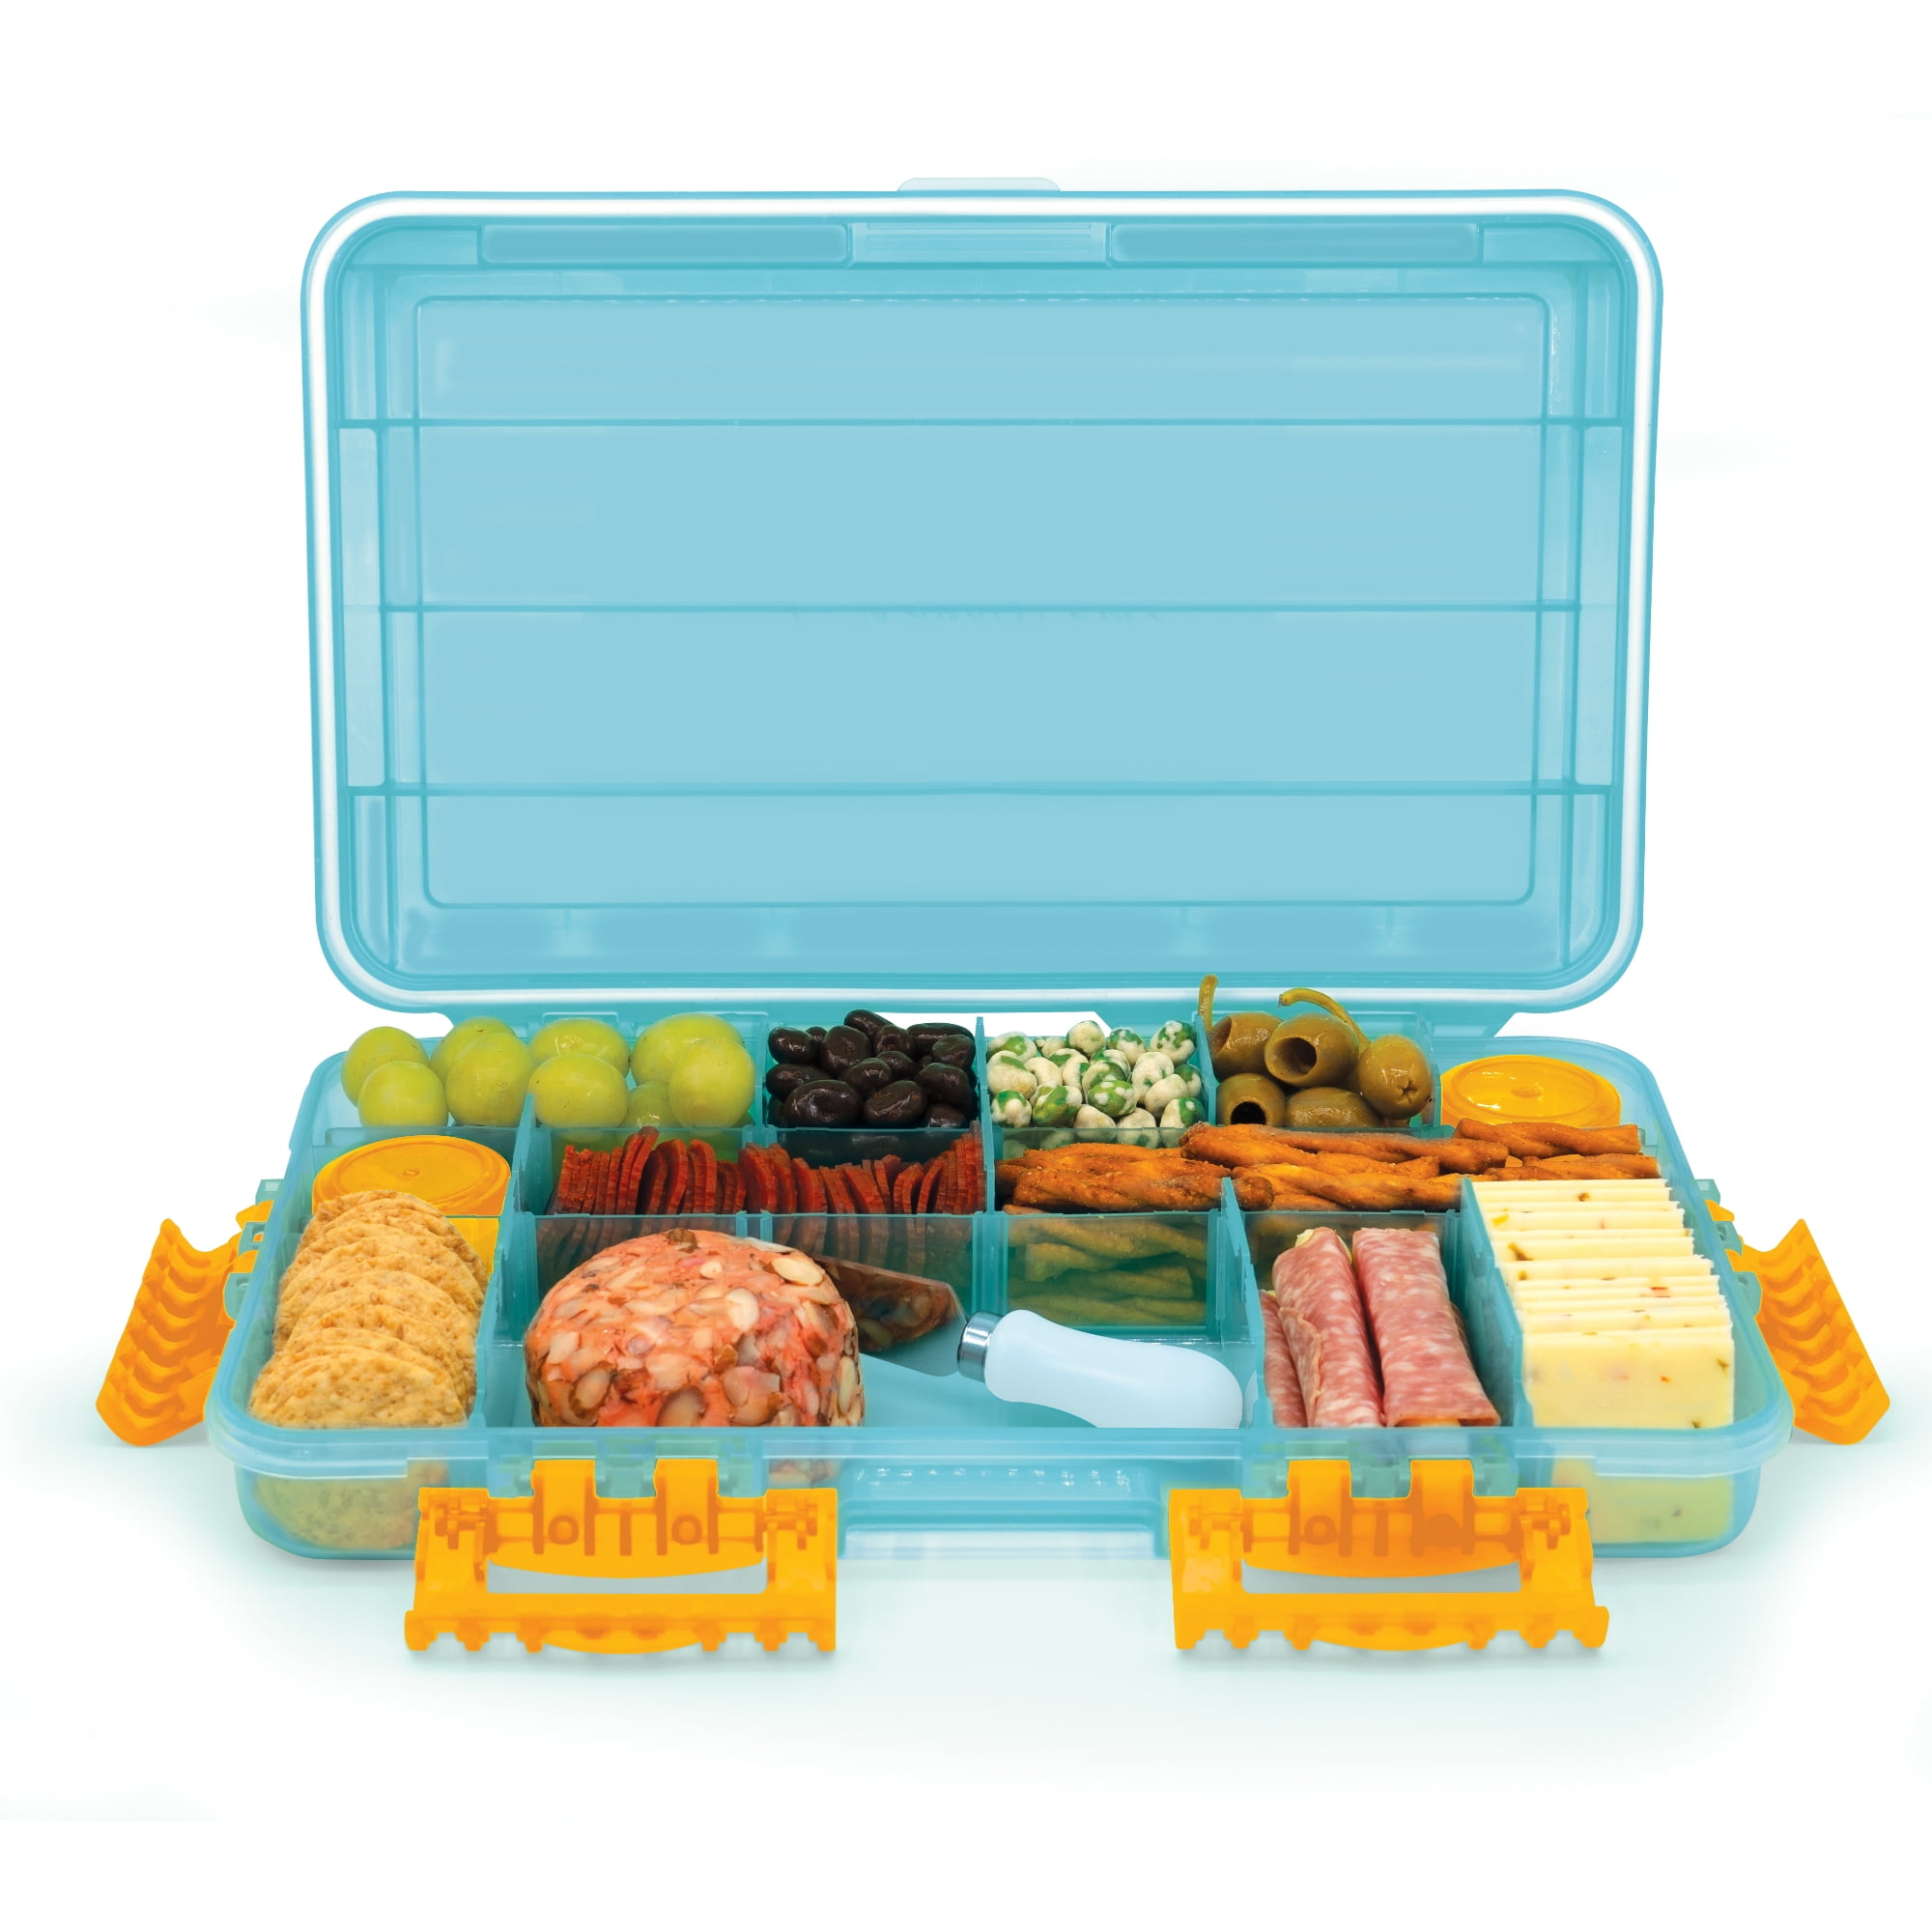 Charcuterie Safe By SubSafe - Waterproof Tackle Box Container Keeps Snacks  Fresh & Dry On the Go - Fill With Cured Meats, Cheese, Nuts - Perfect for  the Boat, Beach, Parties, Picnics, Tailgating & Mor 